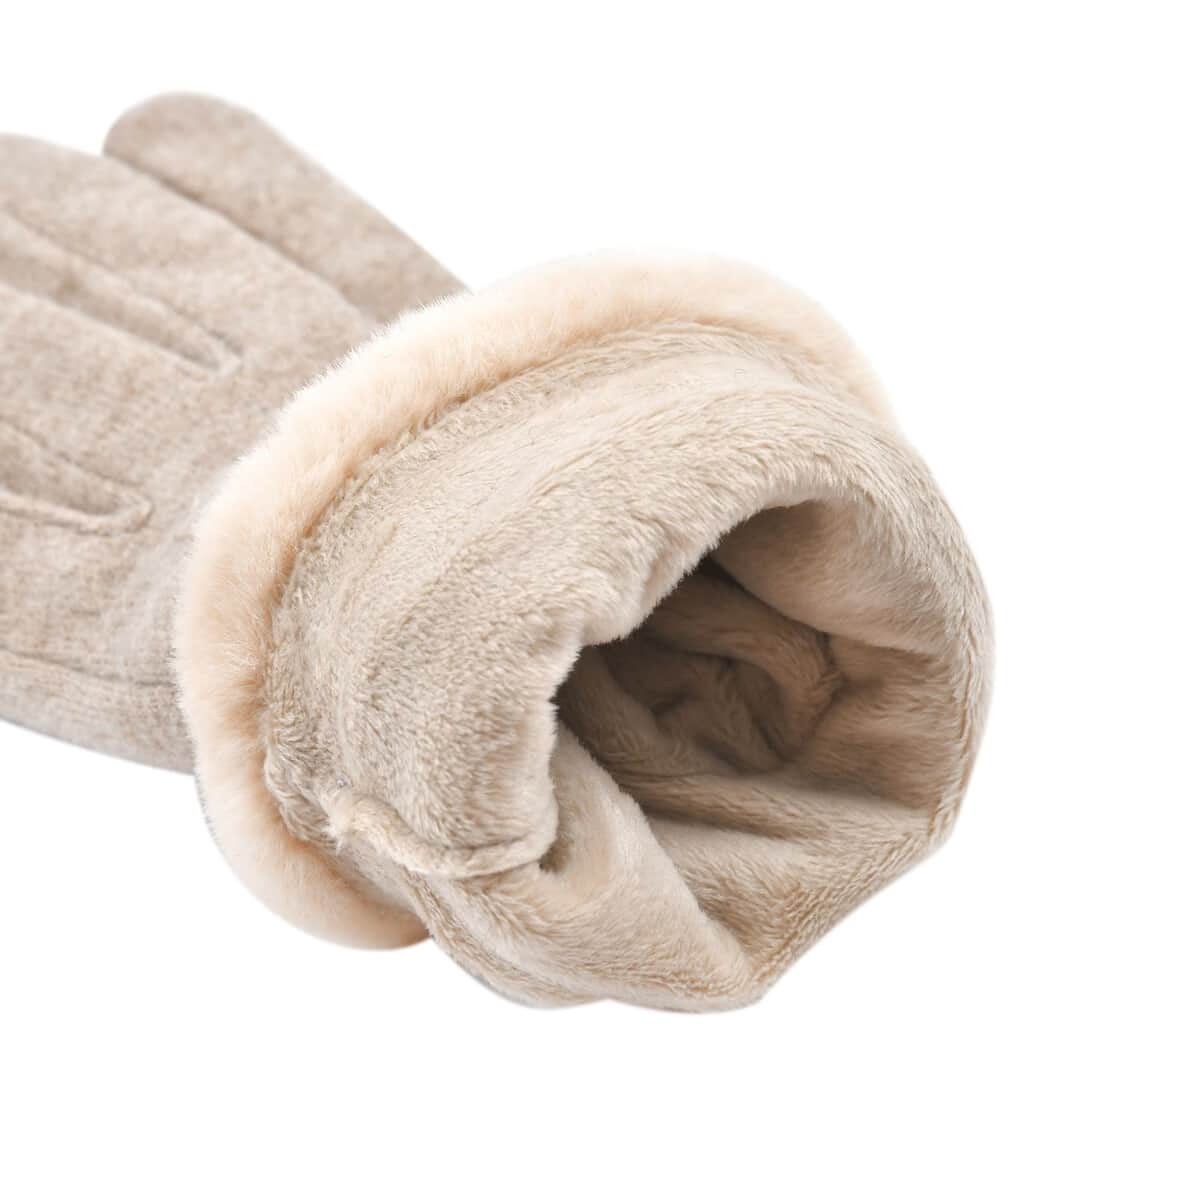 Beige Cashmere Warm Gloves with Faux Fur and Equipped Touch Screen Function (9.05"x3.54") image number 6